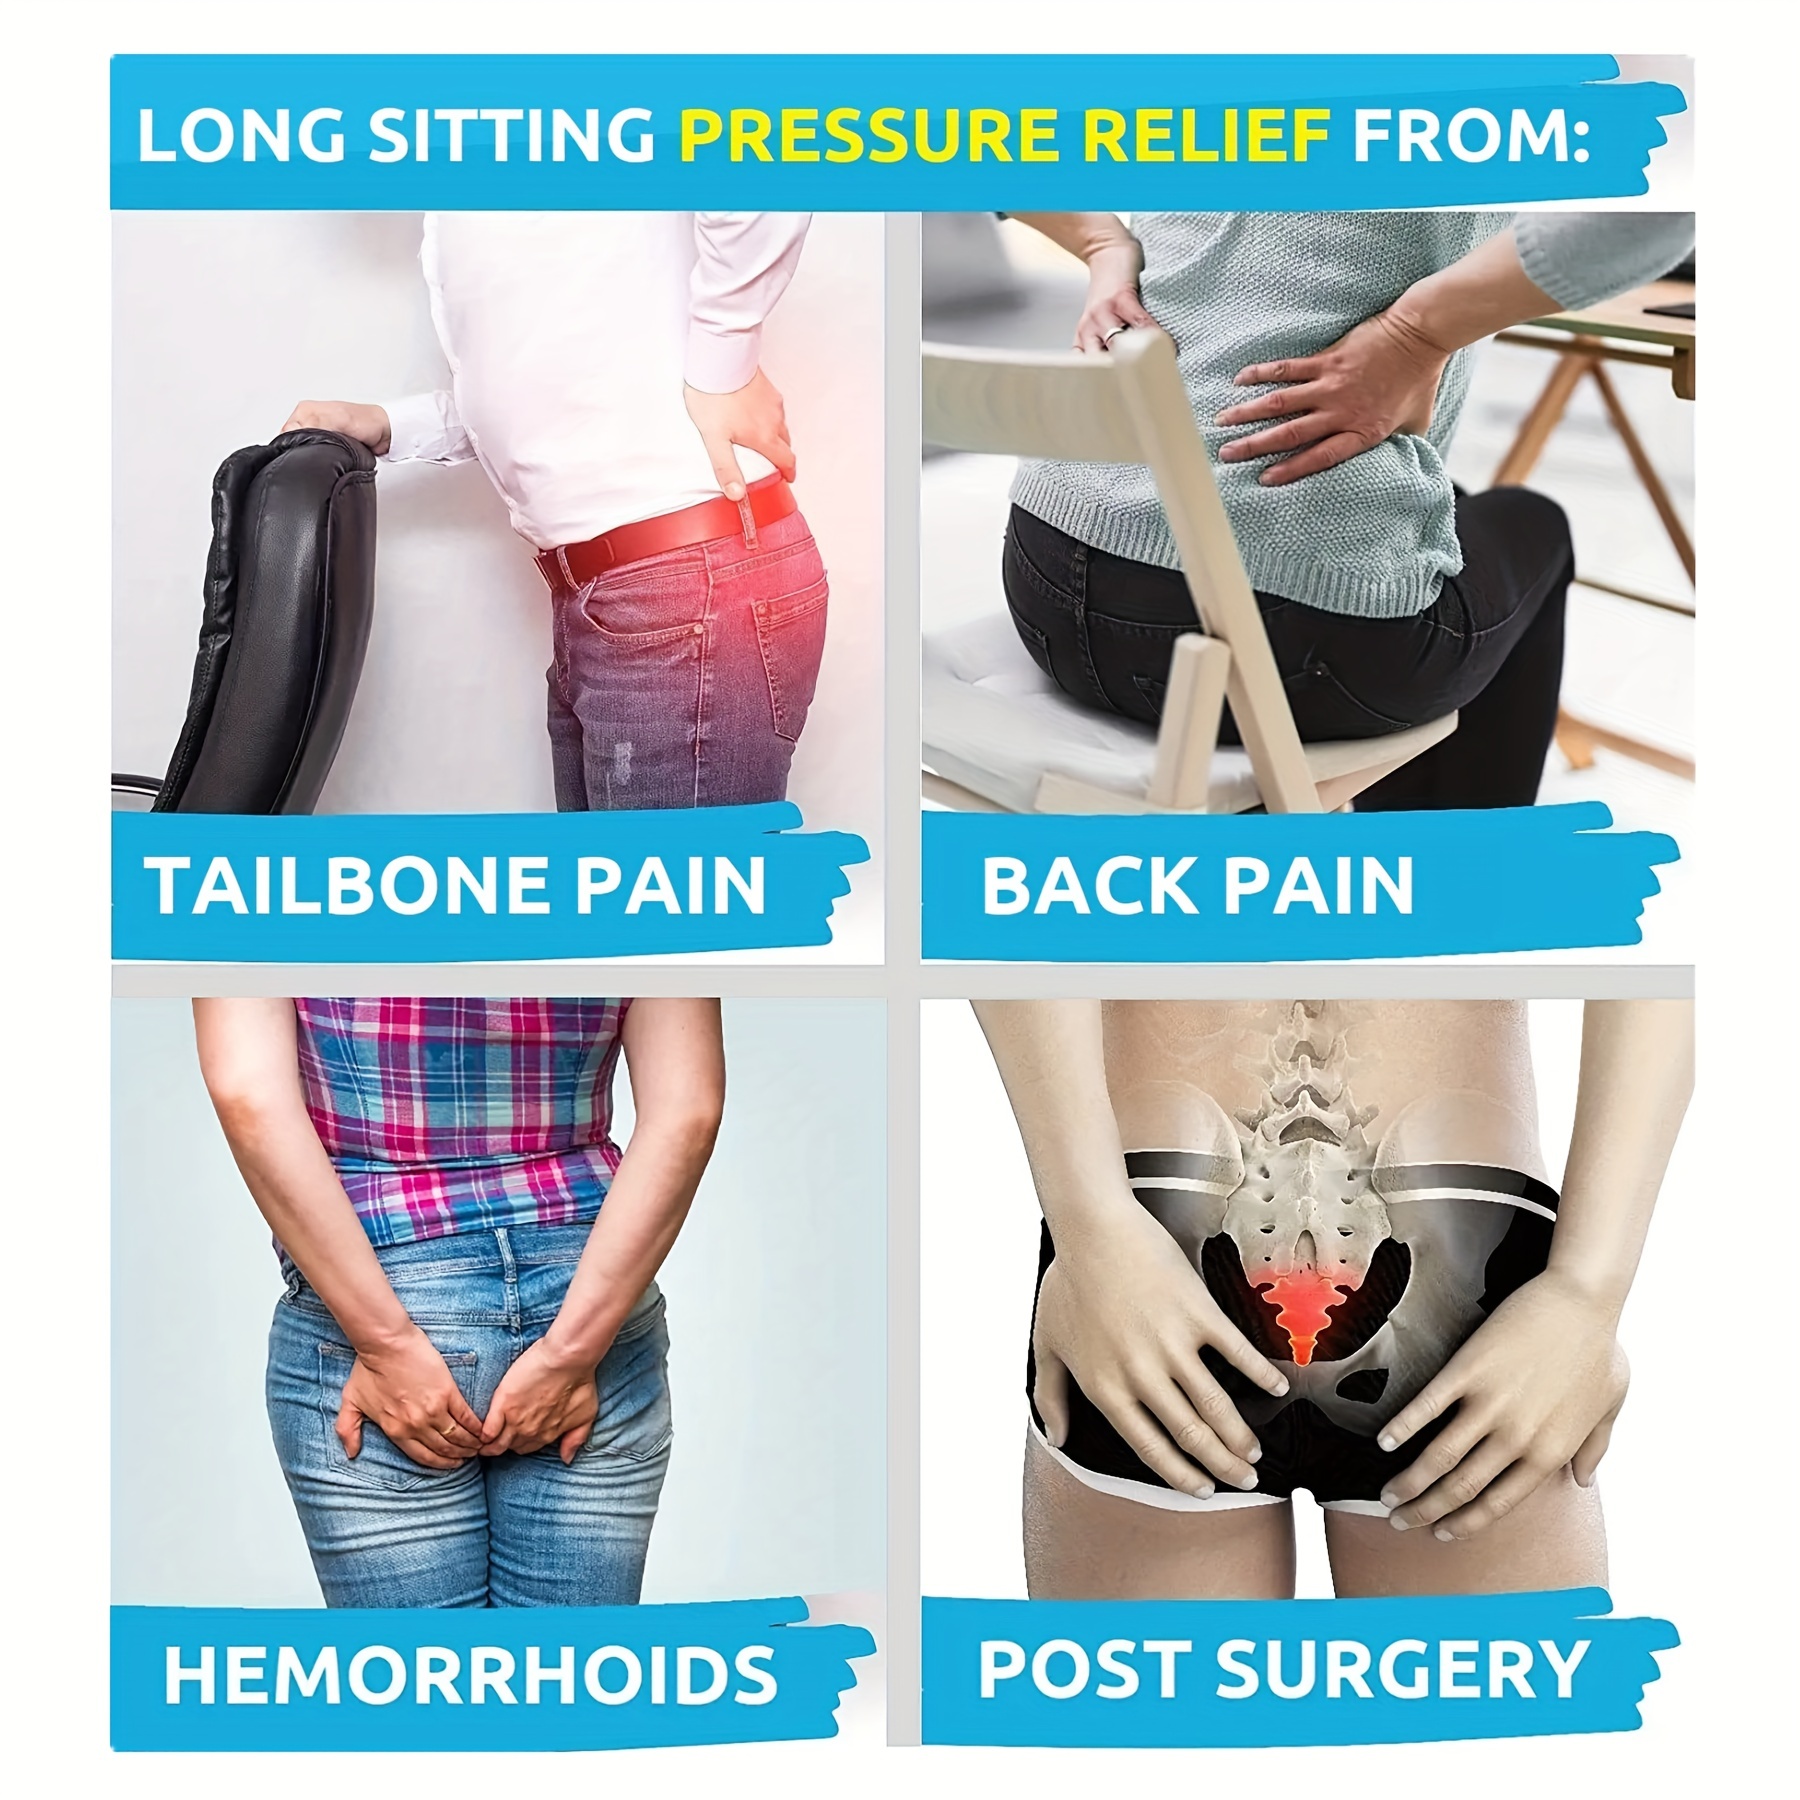 Does Sitting on a Donut Pillow for Hemorrhoids Hurt or Help?